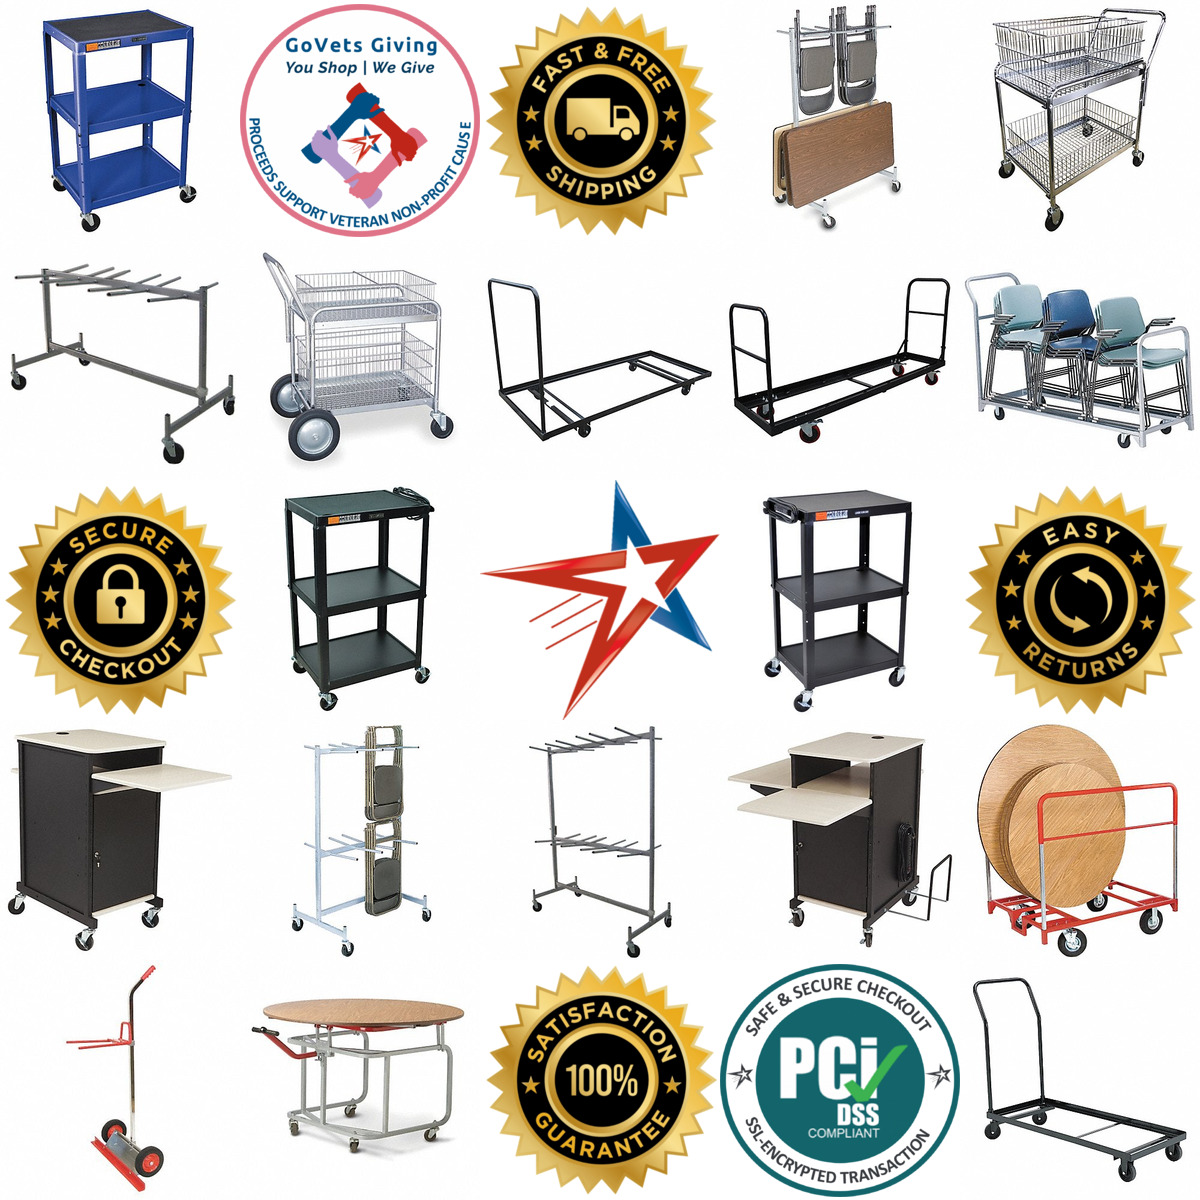 A selection of Office Furniture and Luggage Carts products on GoVets